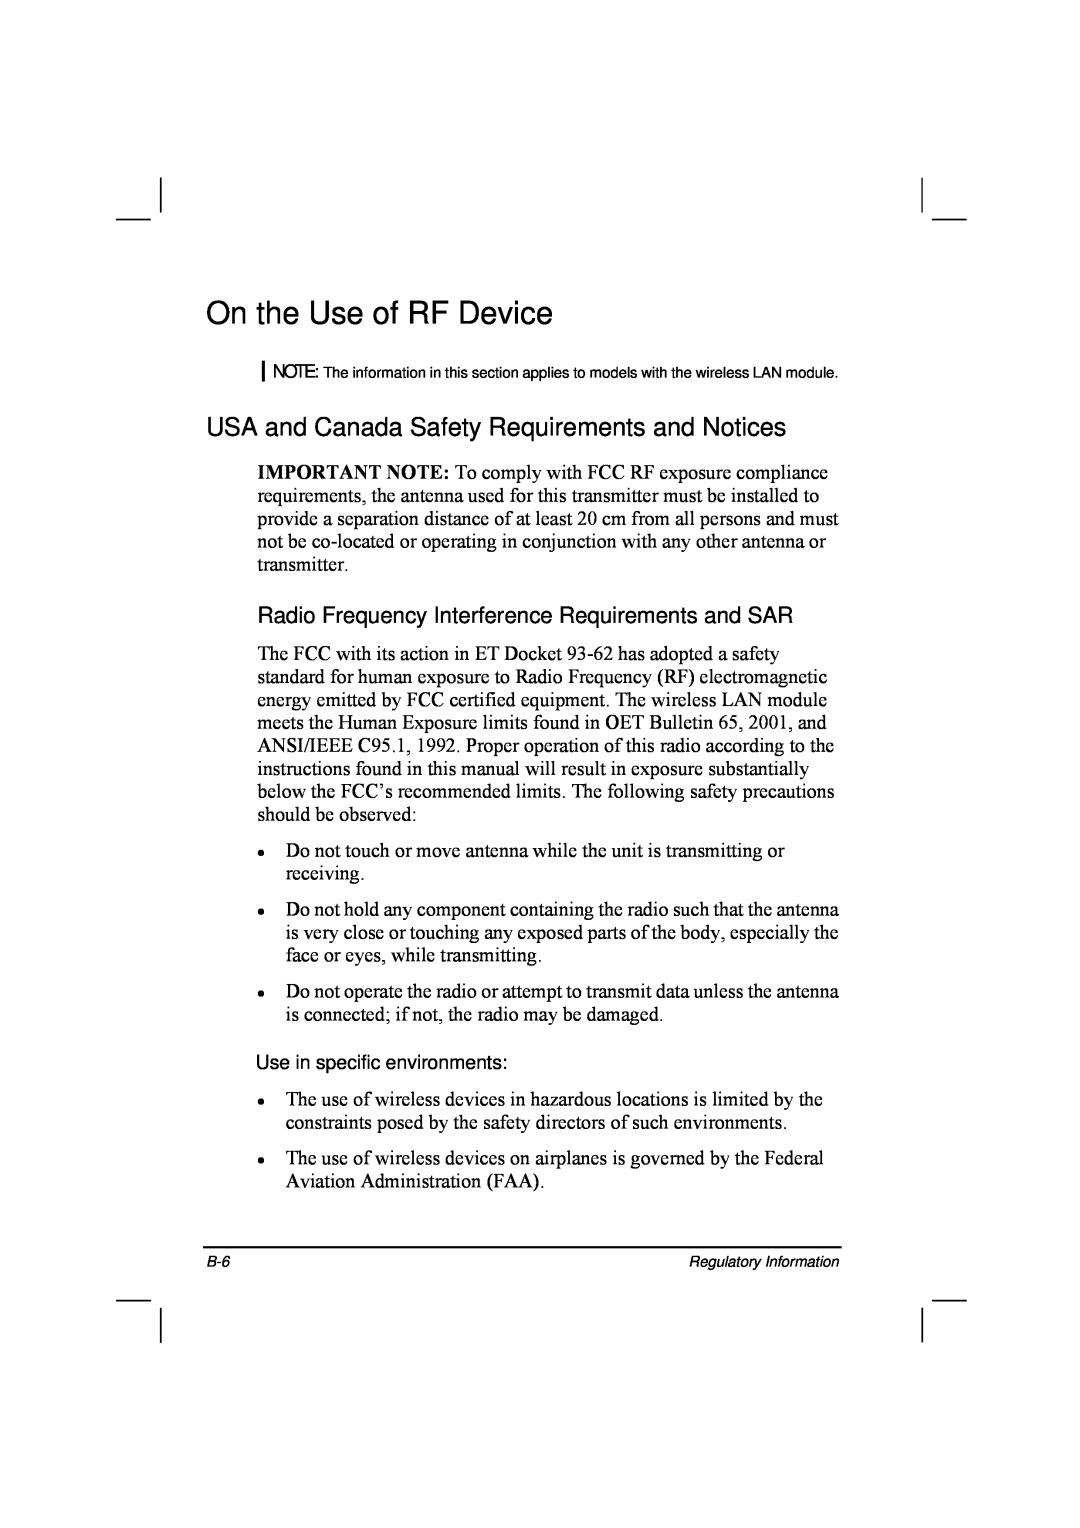 TAG 20 Series manual Use in specific environments, On the Use of RF Device, USA and Canada Safety Requirements and Notices 